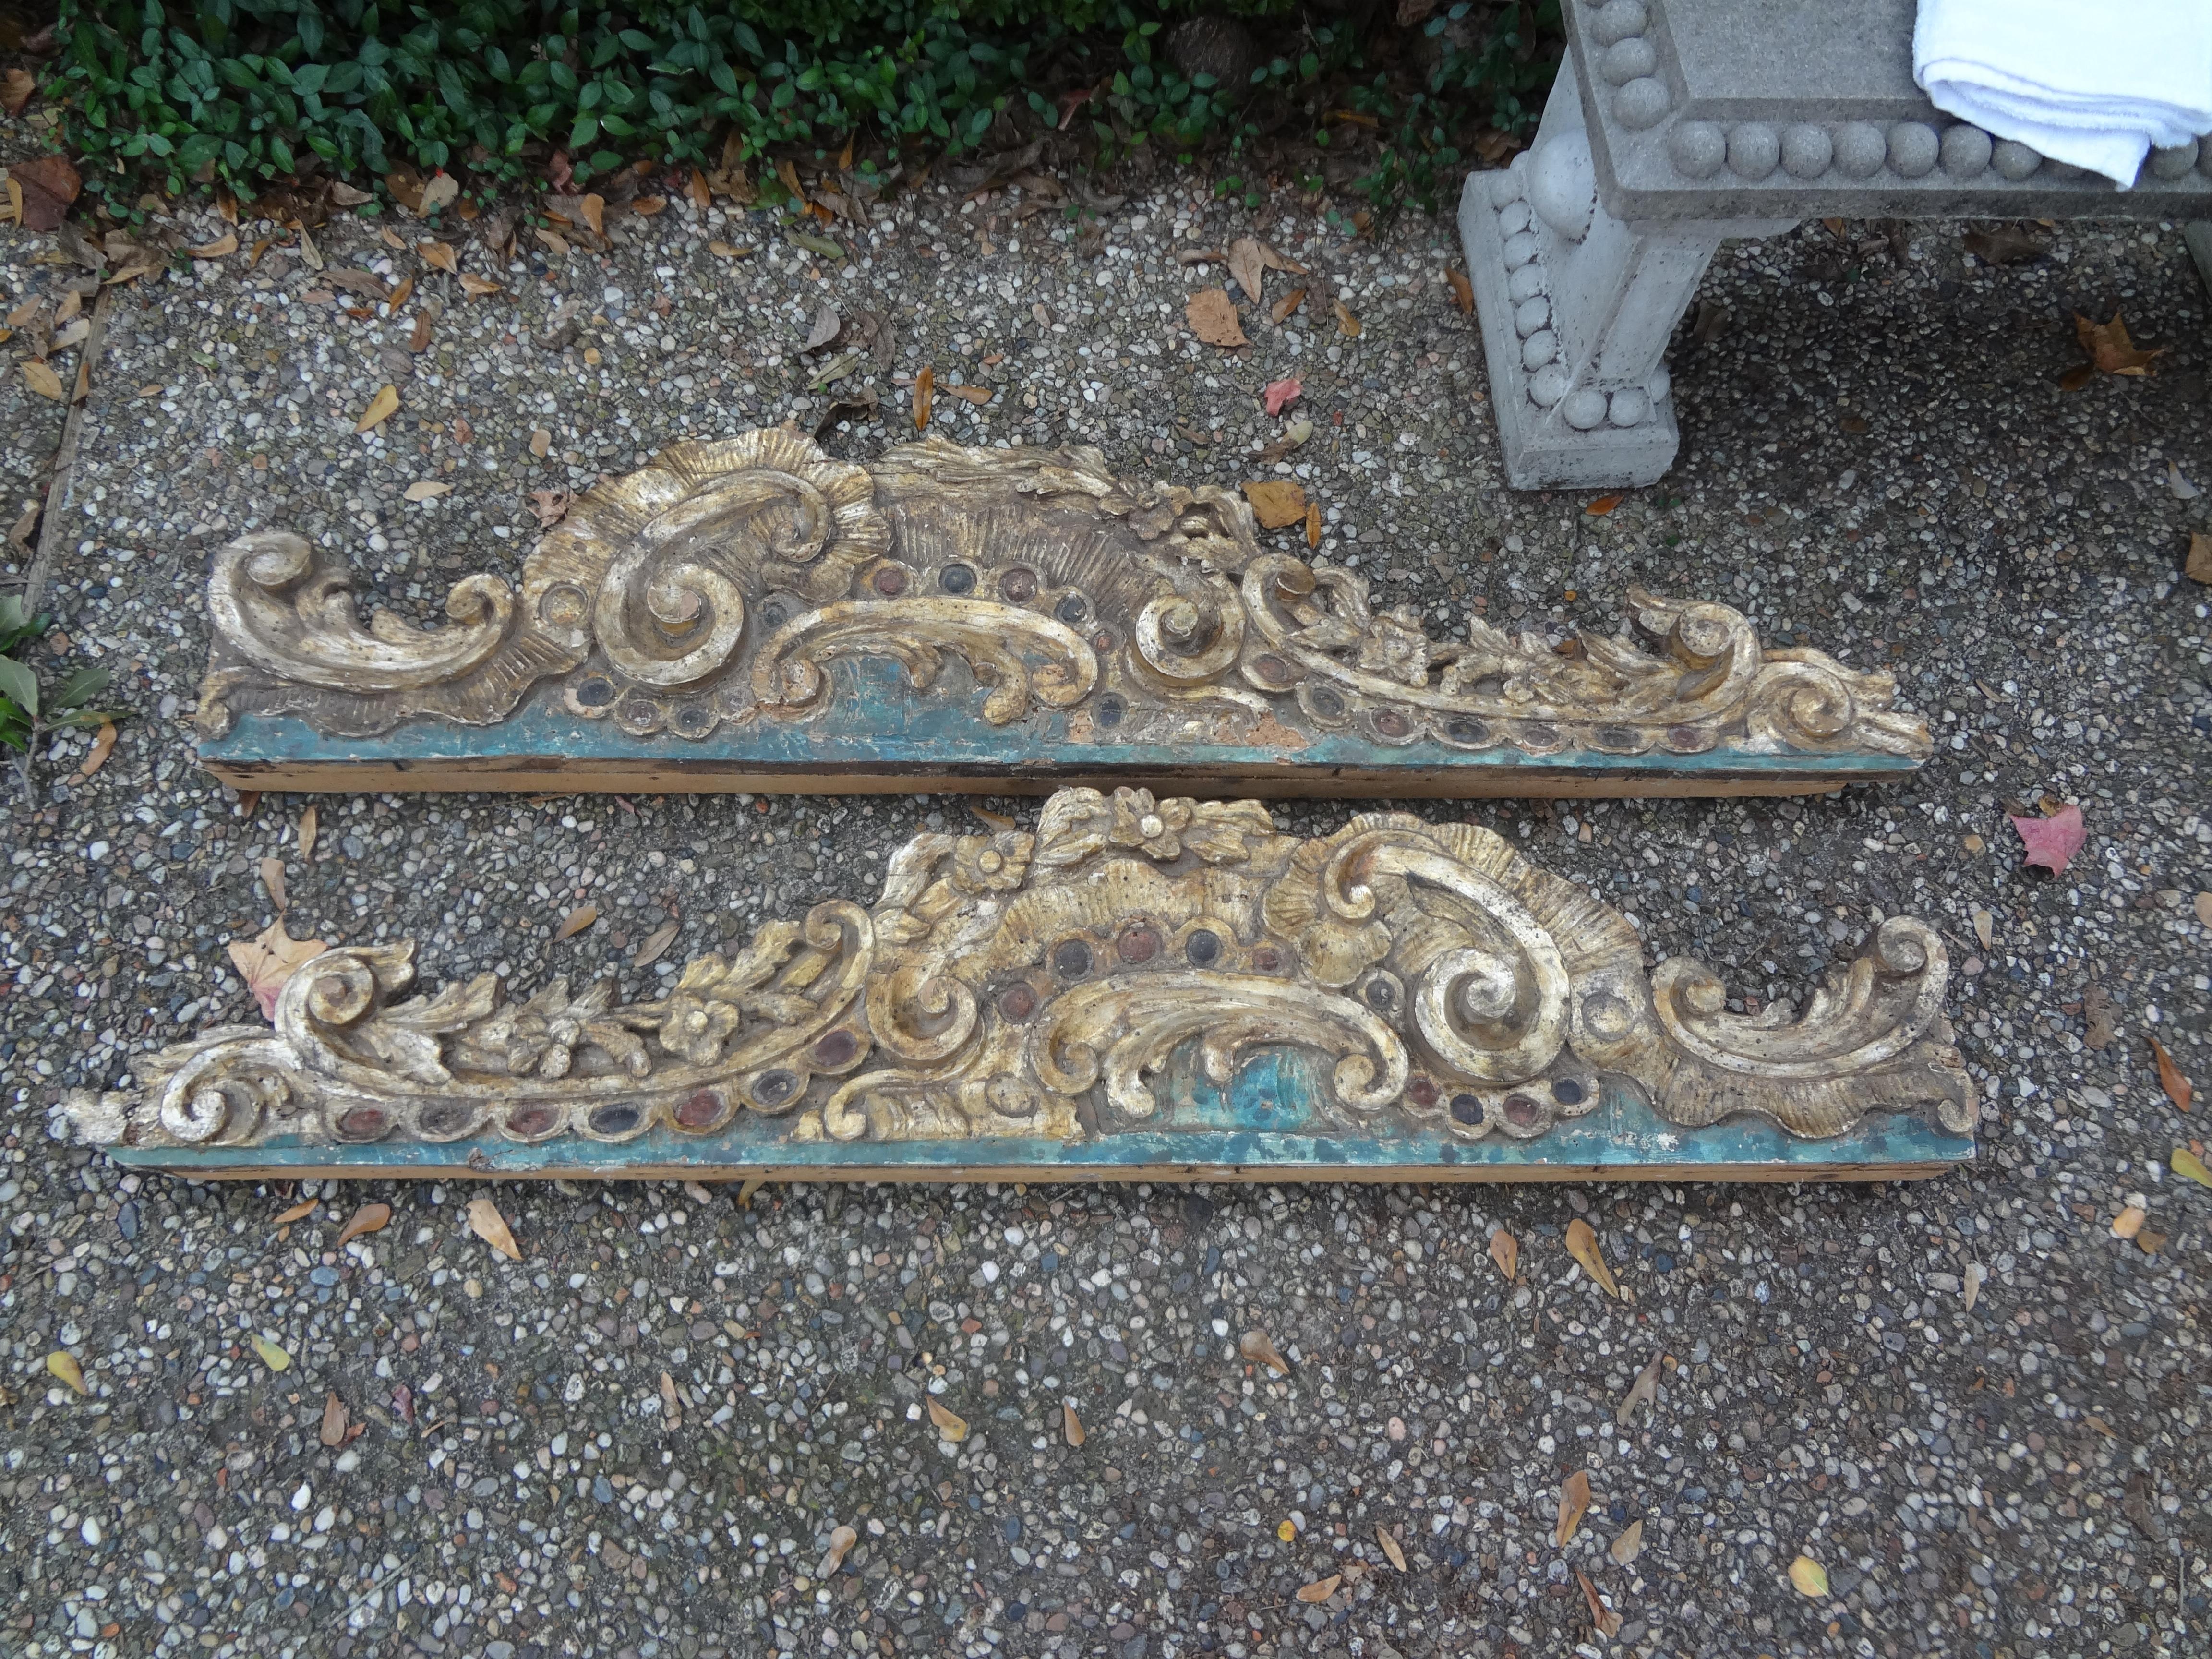 Stunning 17th-18th century Italian Baroque painted and parcel-gilt carved architectural elements, fragments or panels. These beautiful antique Italian carved pieces will make a statement in a contemporary or antique interior.
Dimensions provided